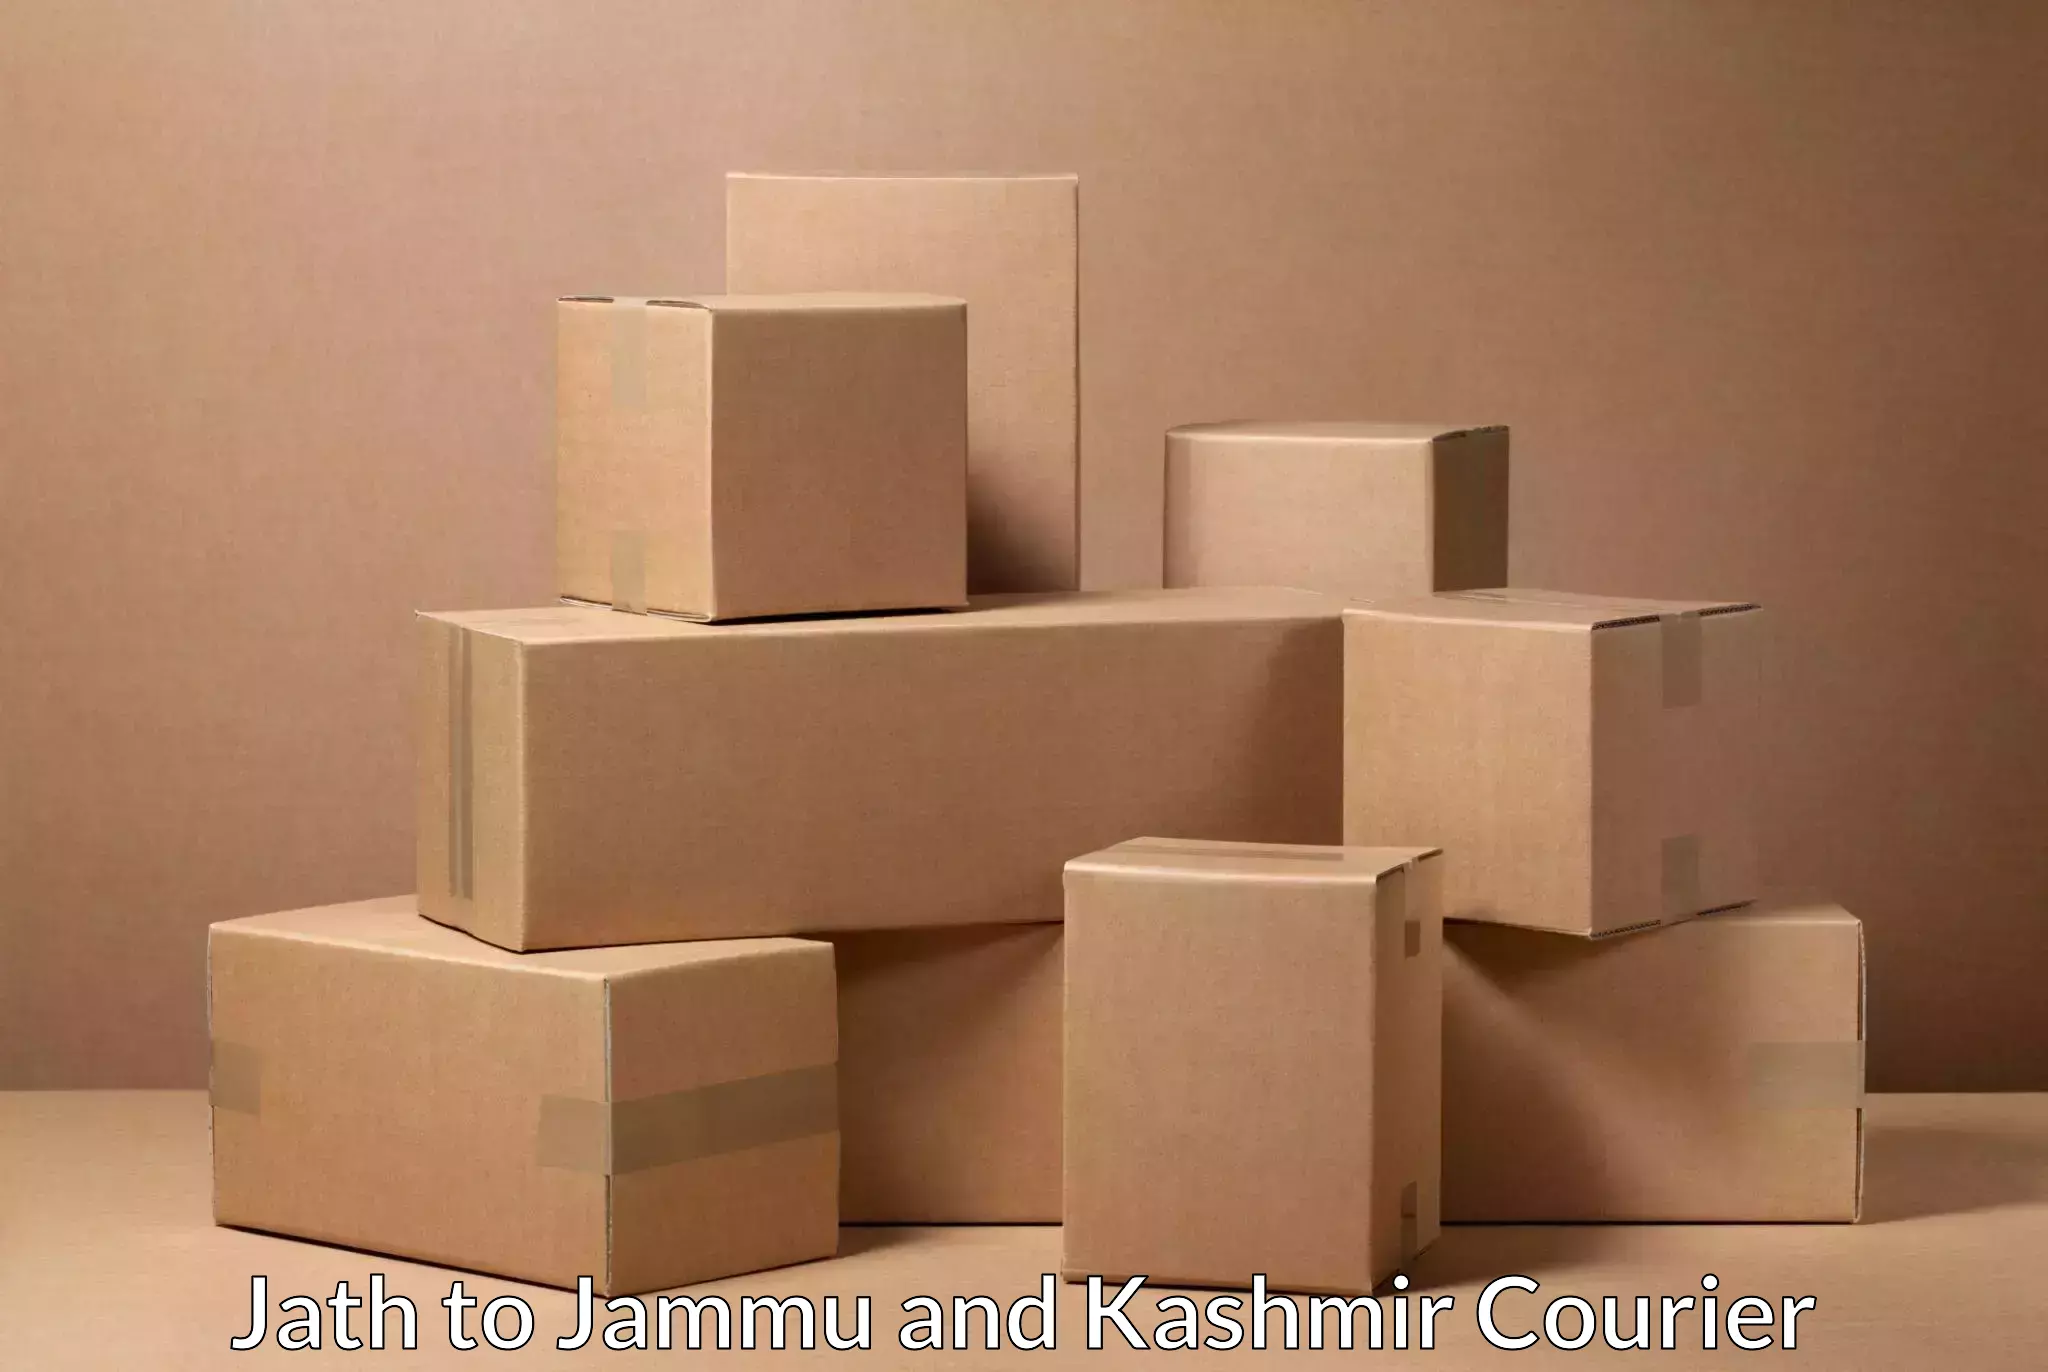 Personal parcel delivery in Jath to Jammu and Kashmir